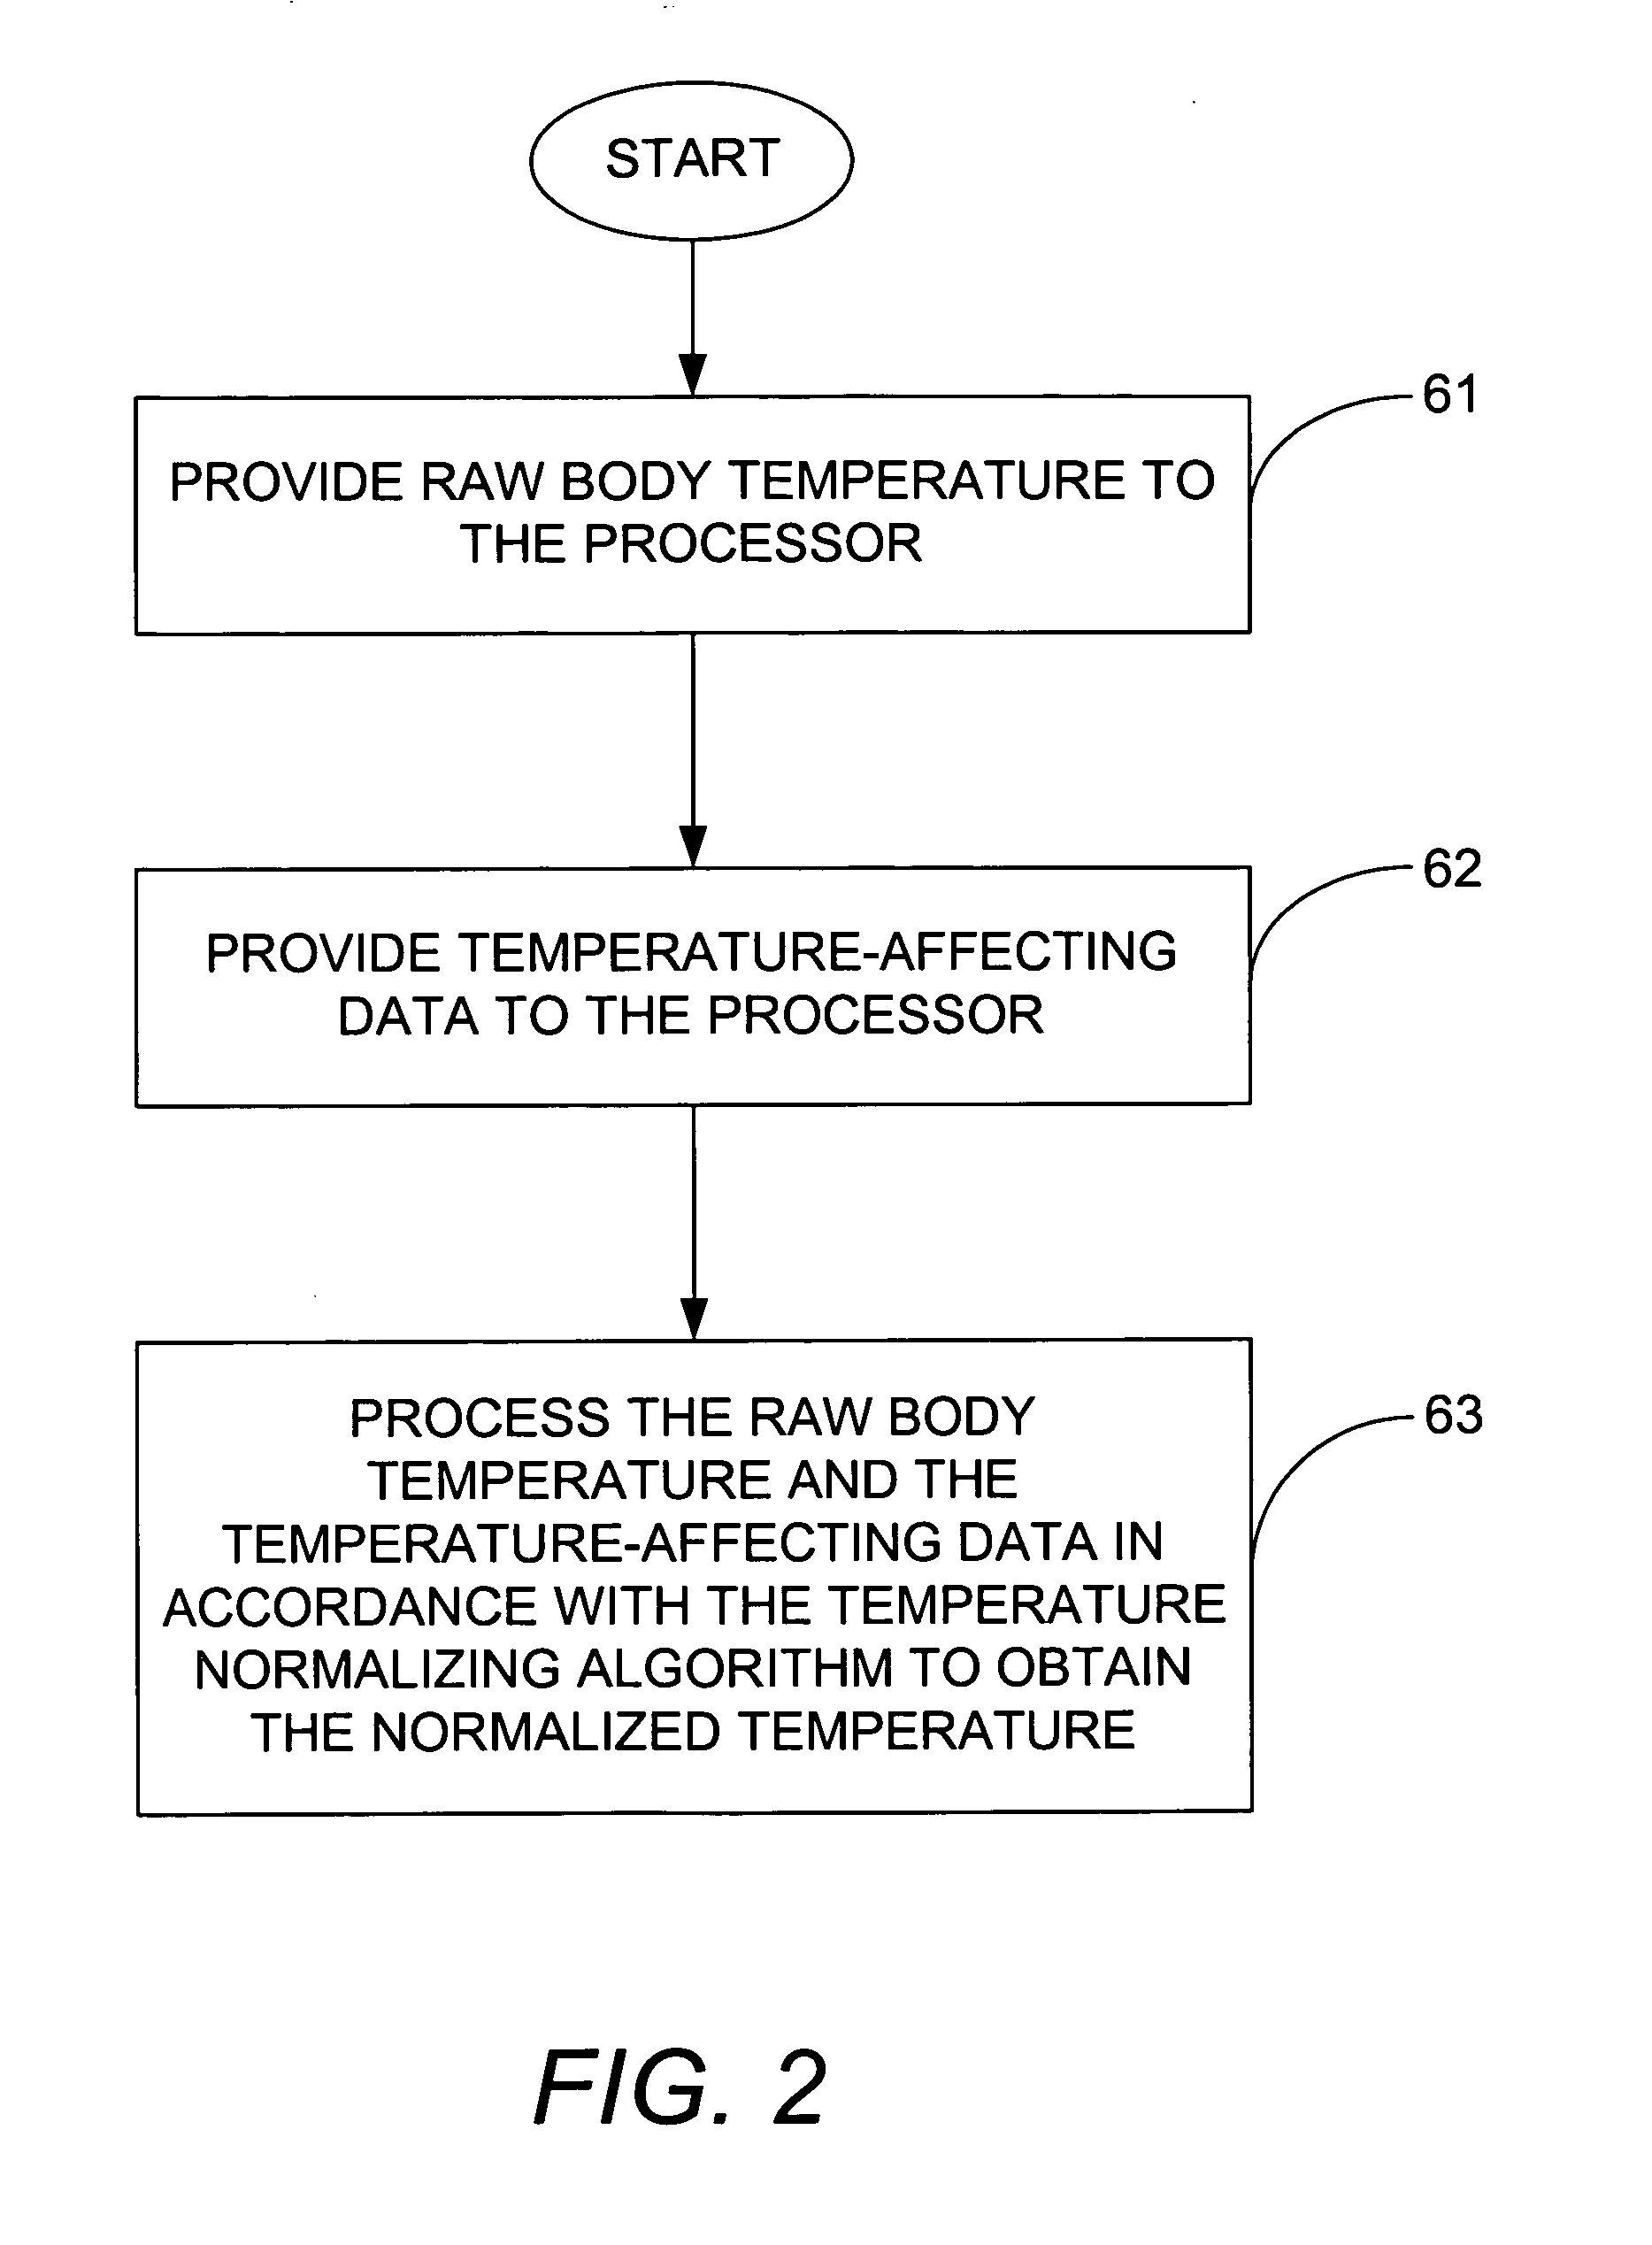 Bio-accurate temperature measurement device and method of quantitatively normalizing a body temperature measurement to determine a physiologically significant temperature event